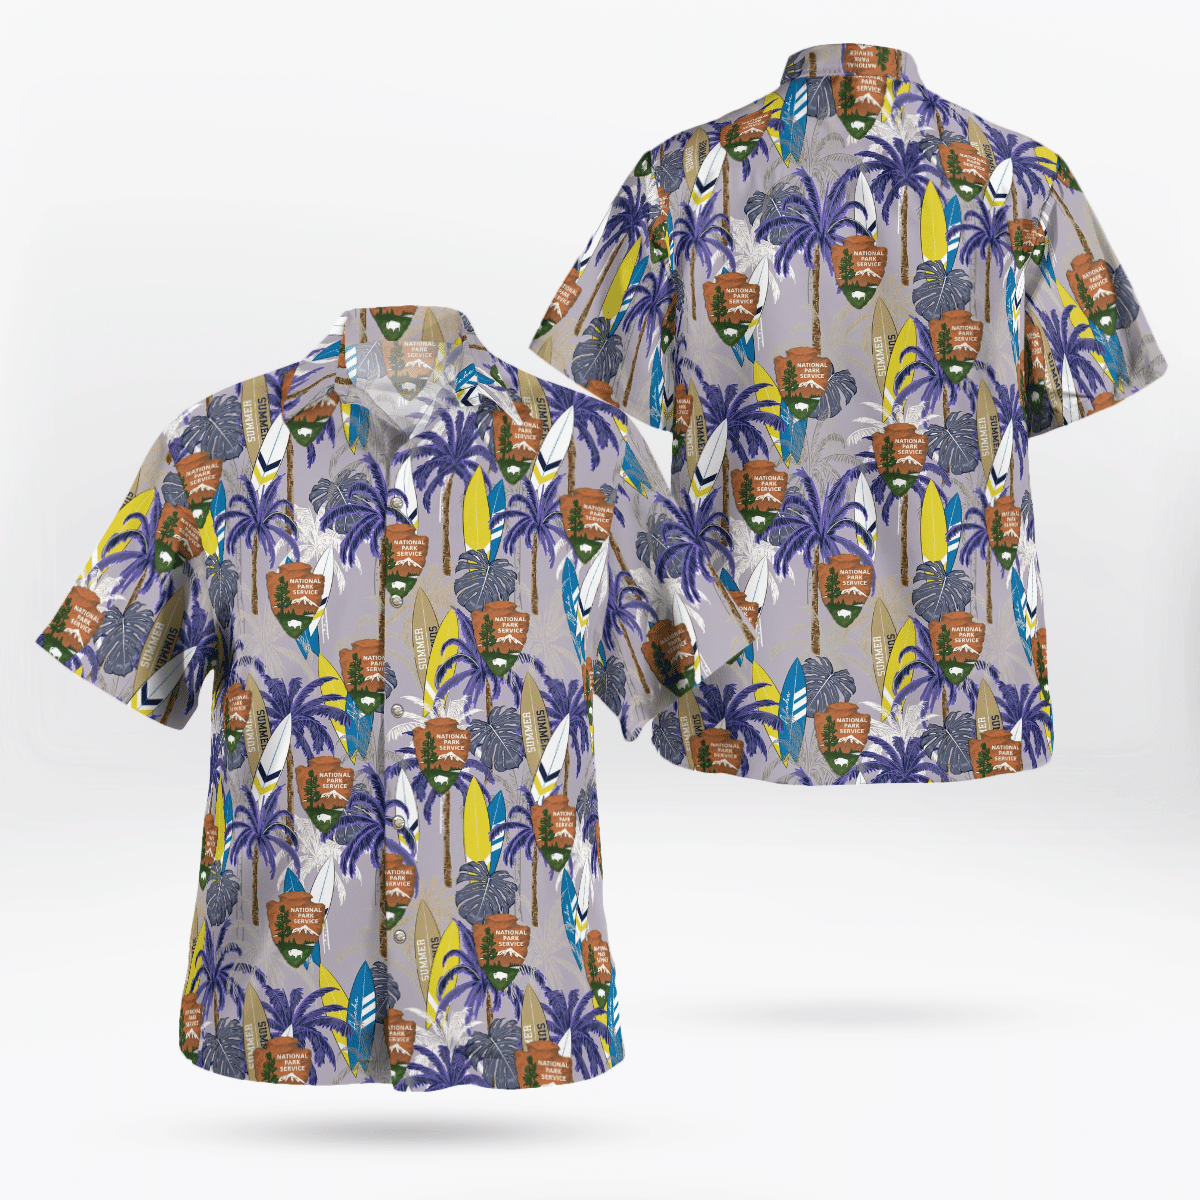 Shop now to find the perfect Hawaii Shirt for your hobby 74